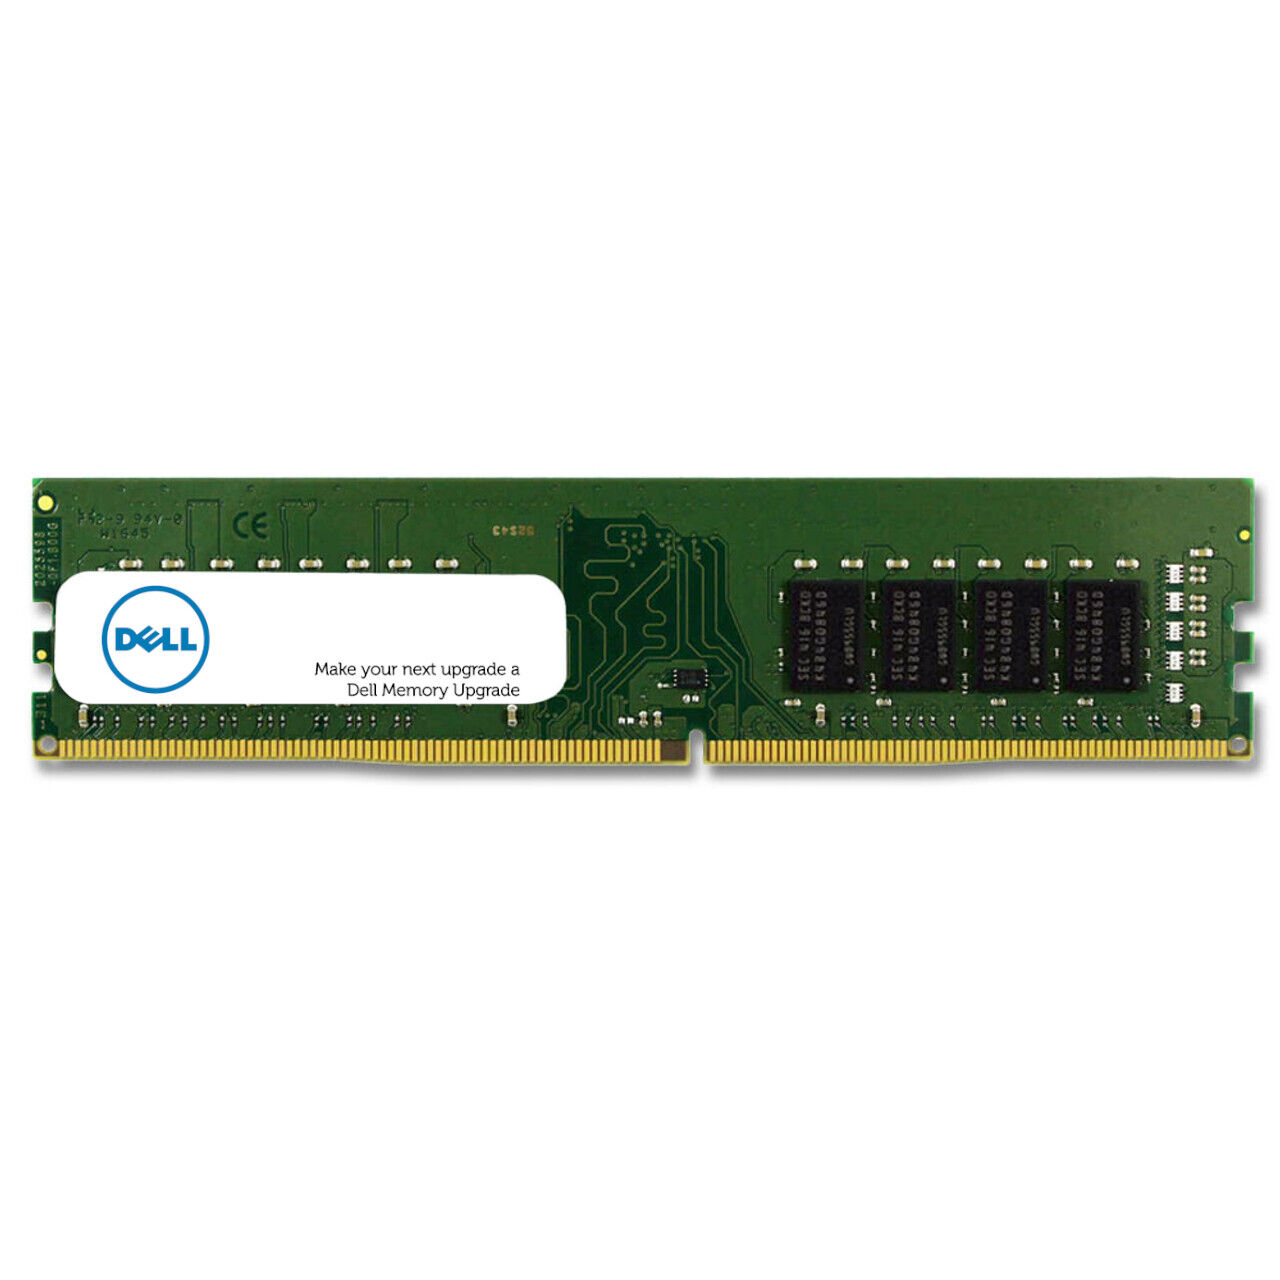 Dell Memory SNPVT8FPC/4G A6994459 4GB 2Rx8 DDR3 UDIMM 1600MHz RAM